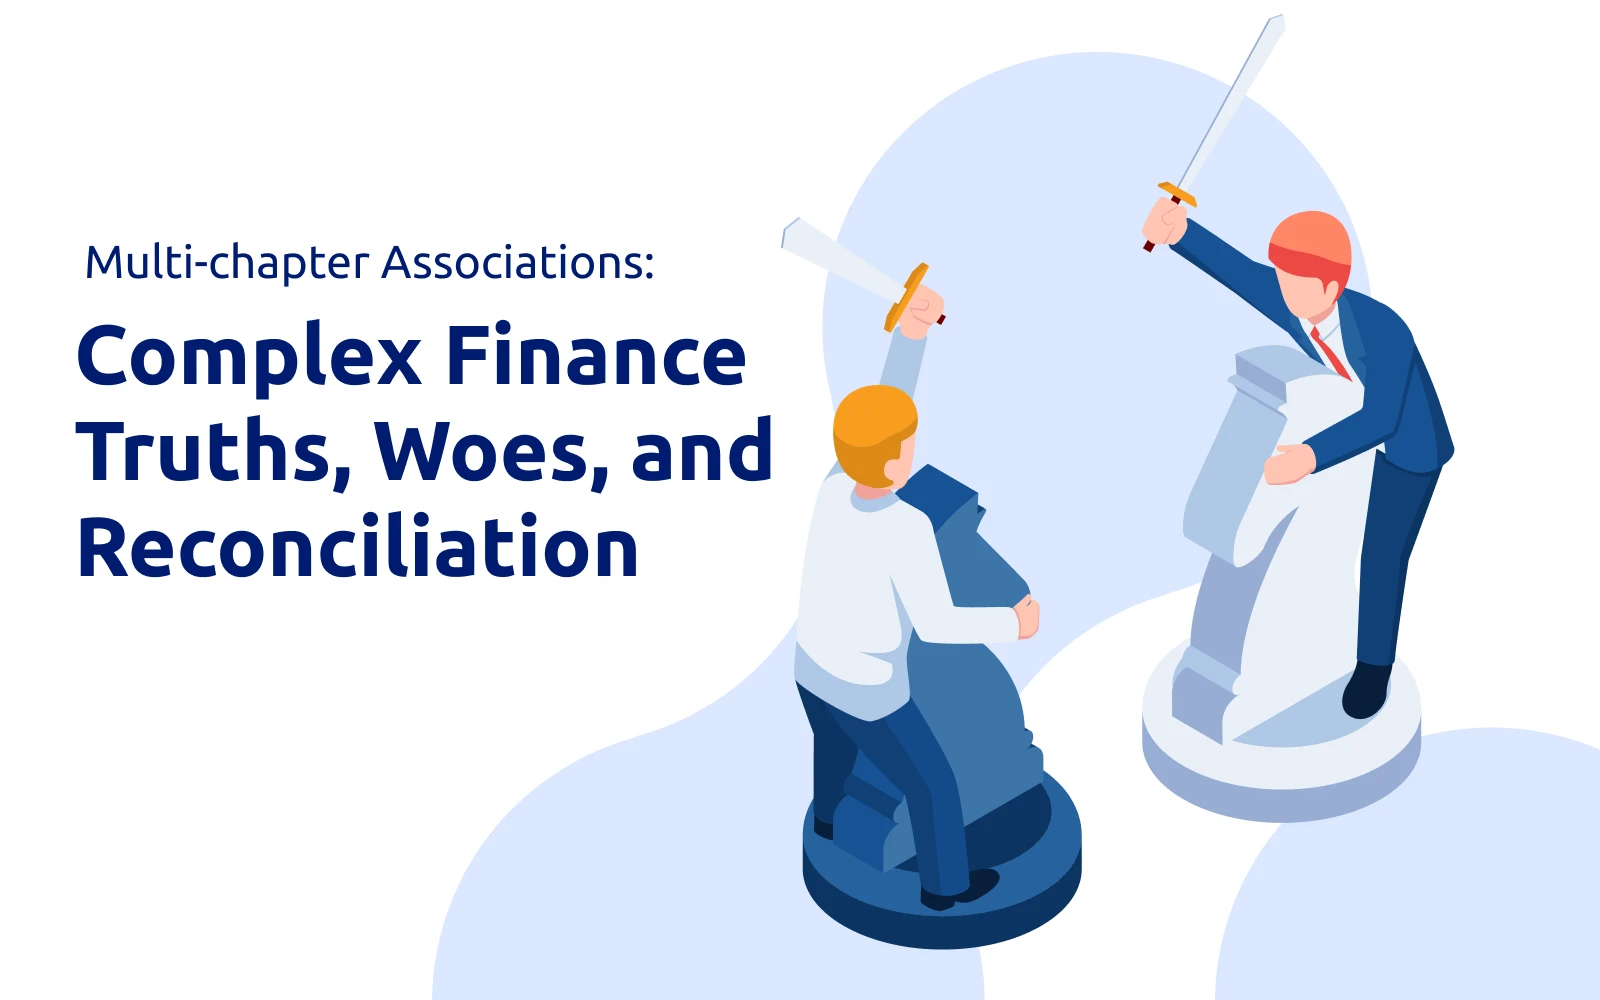 Multi-chapter Organizations: Complex Finance Truths, Woes, and Reconciliation